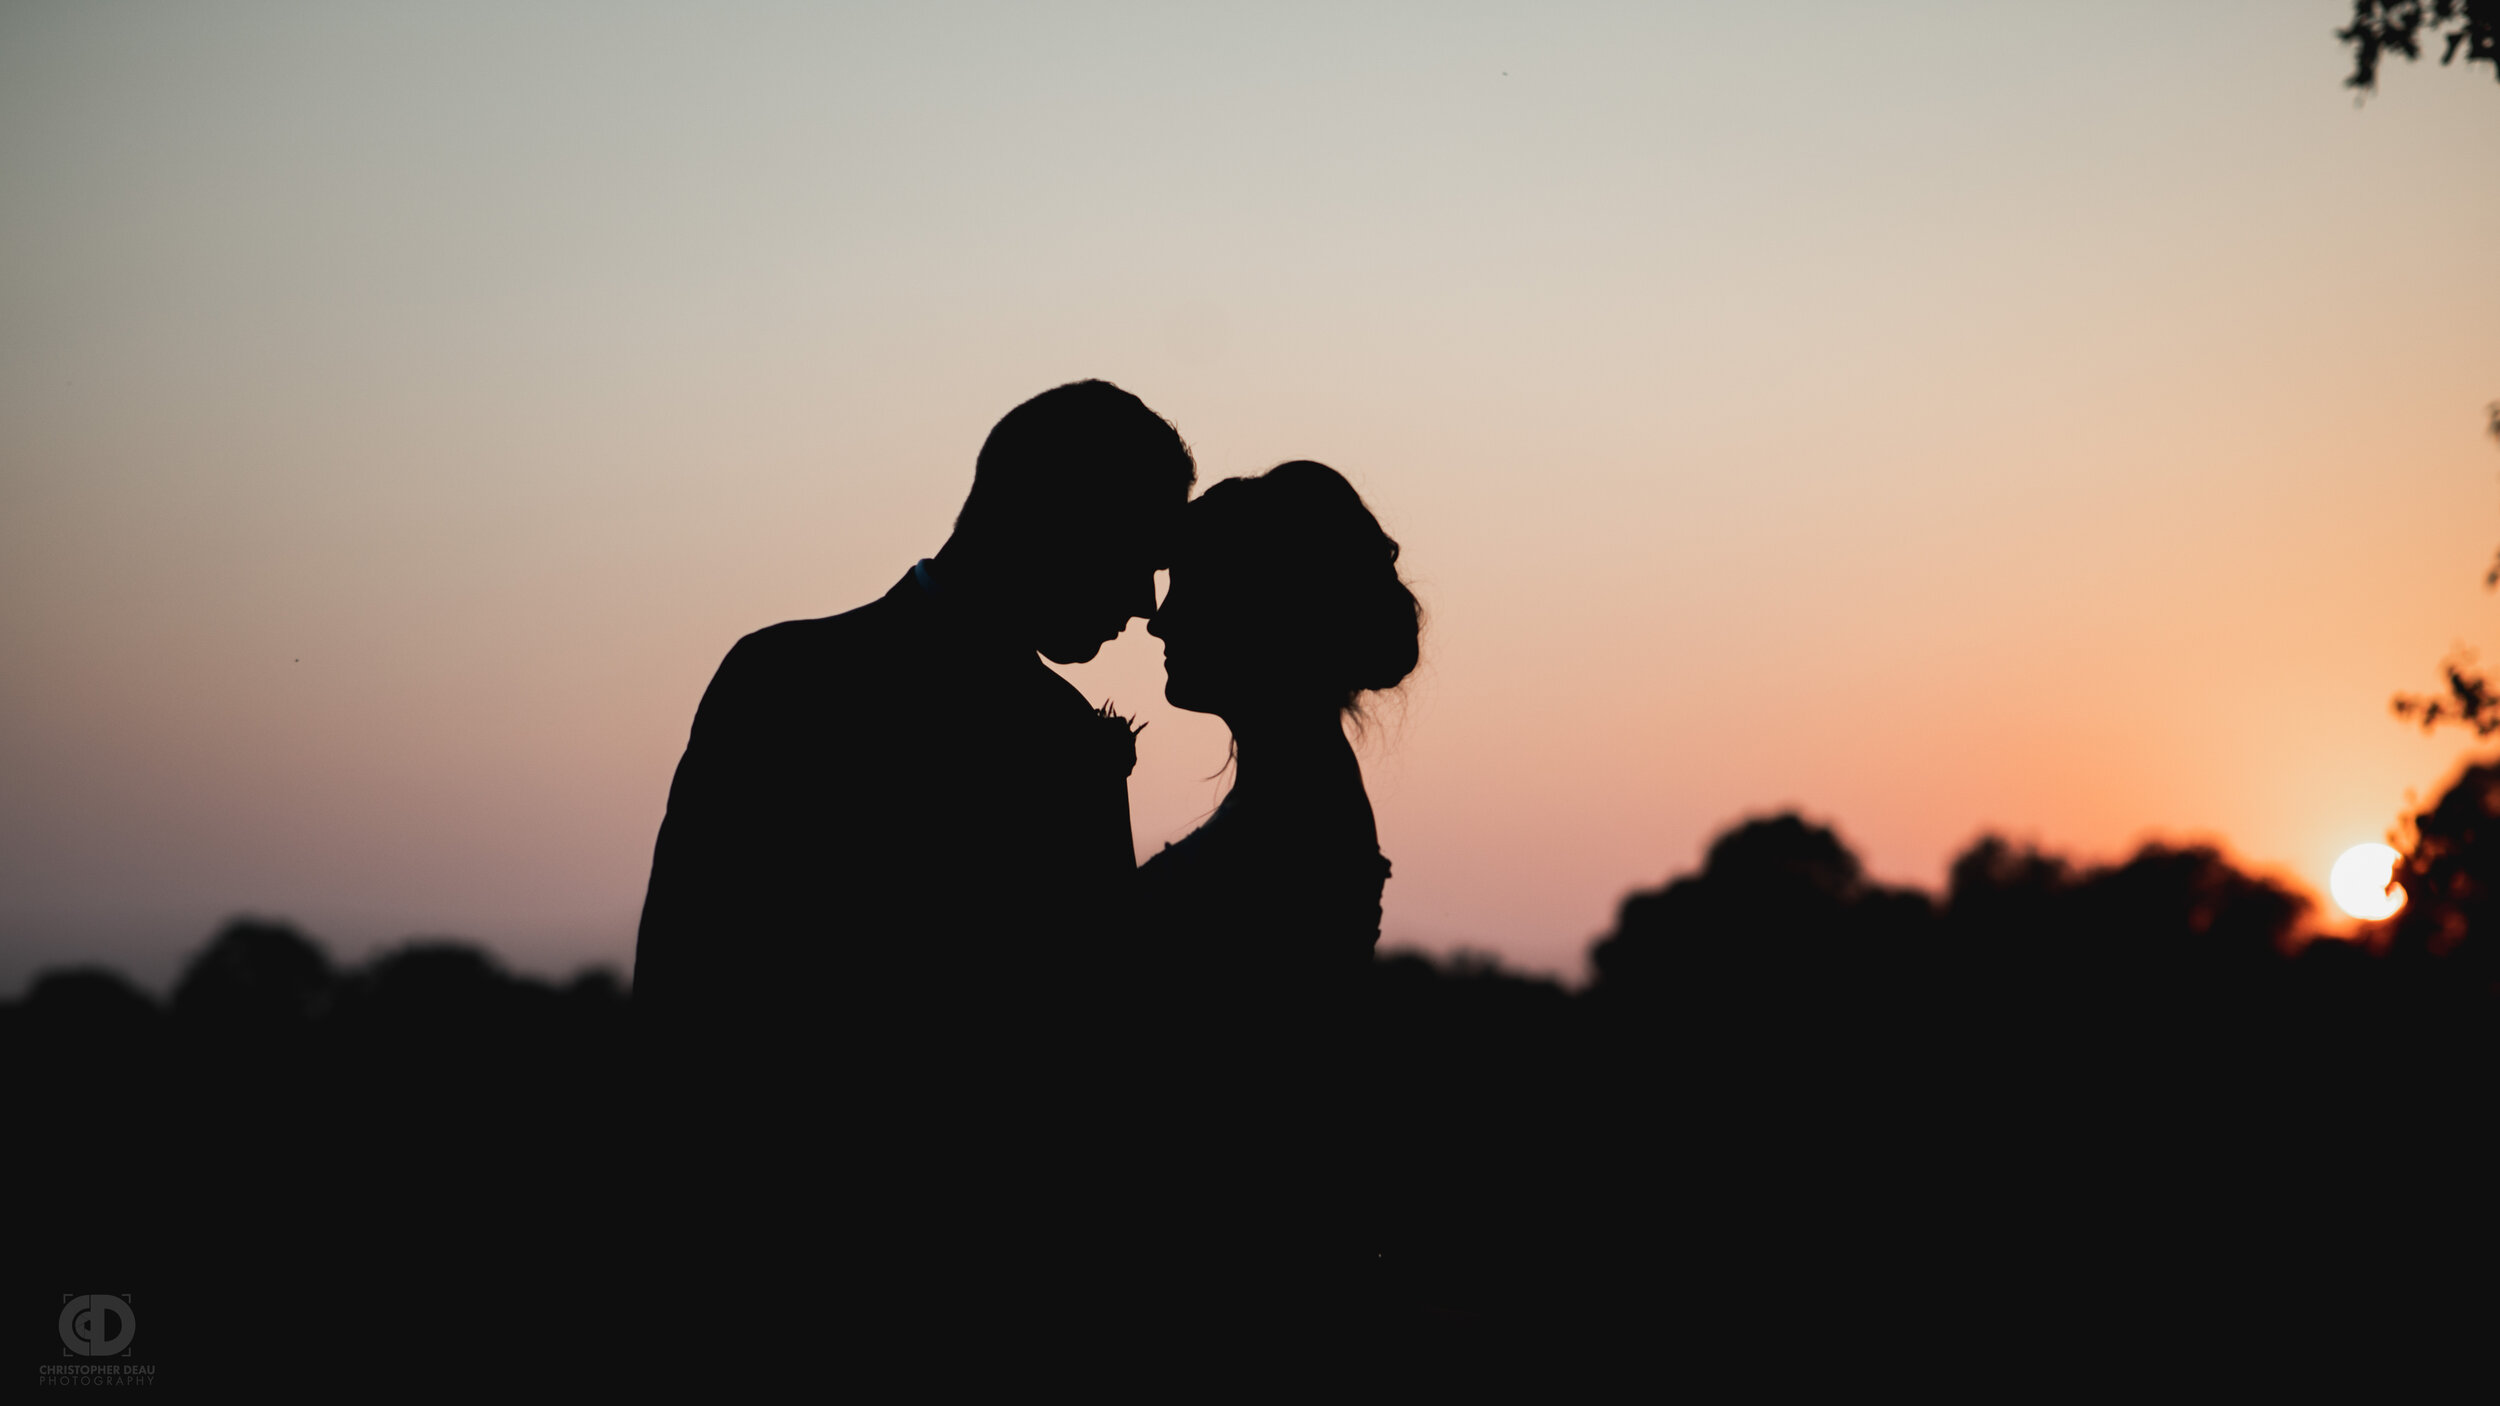  sunset bride and groom silhouette  